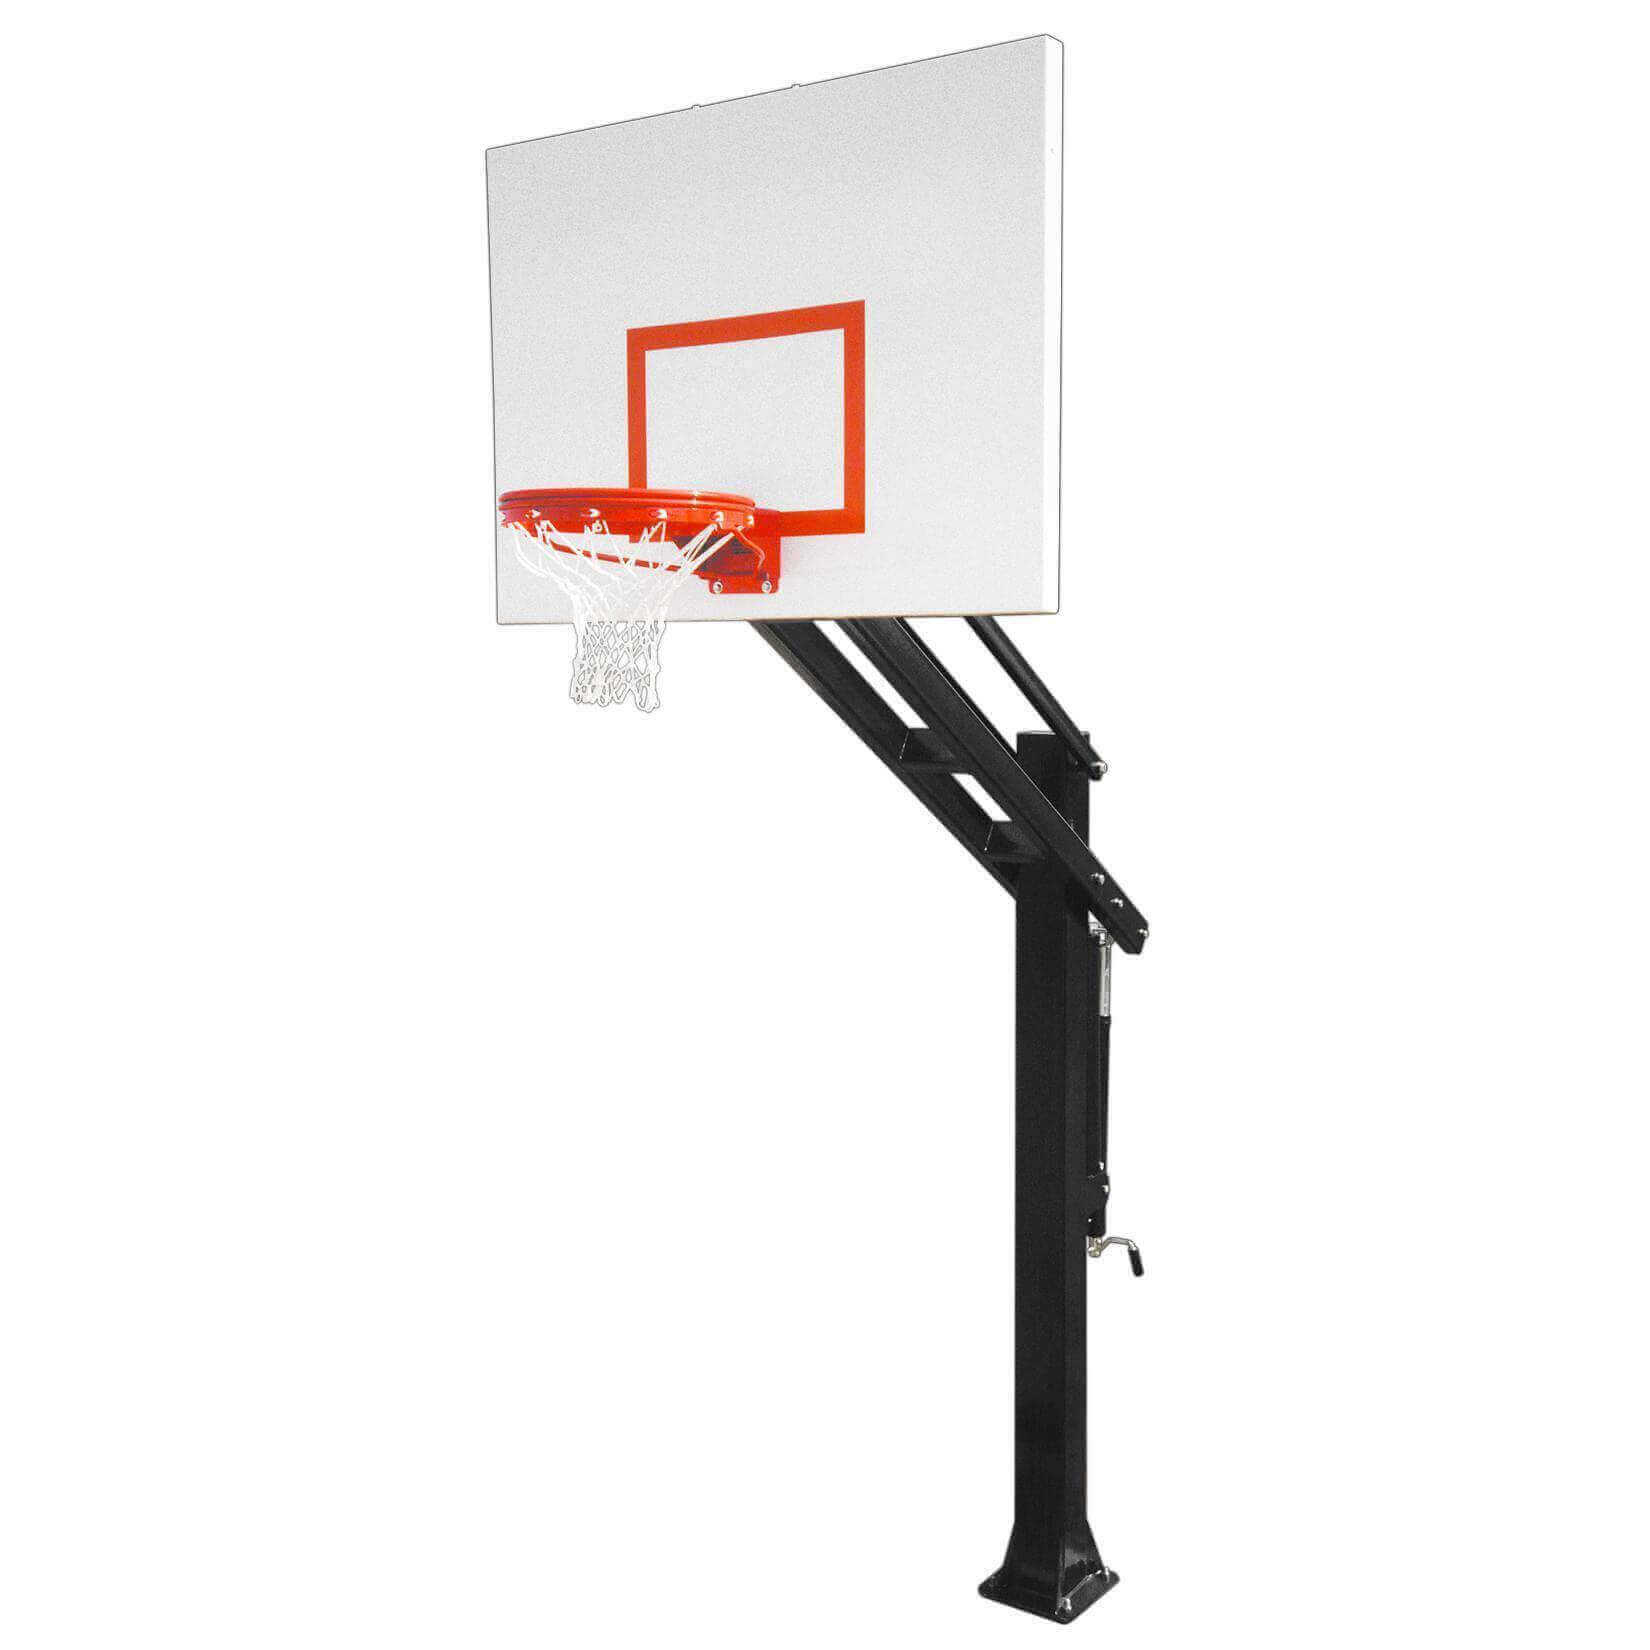 First Team Titan Series Of In-Ground Hoops